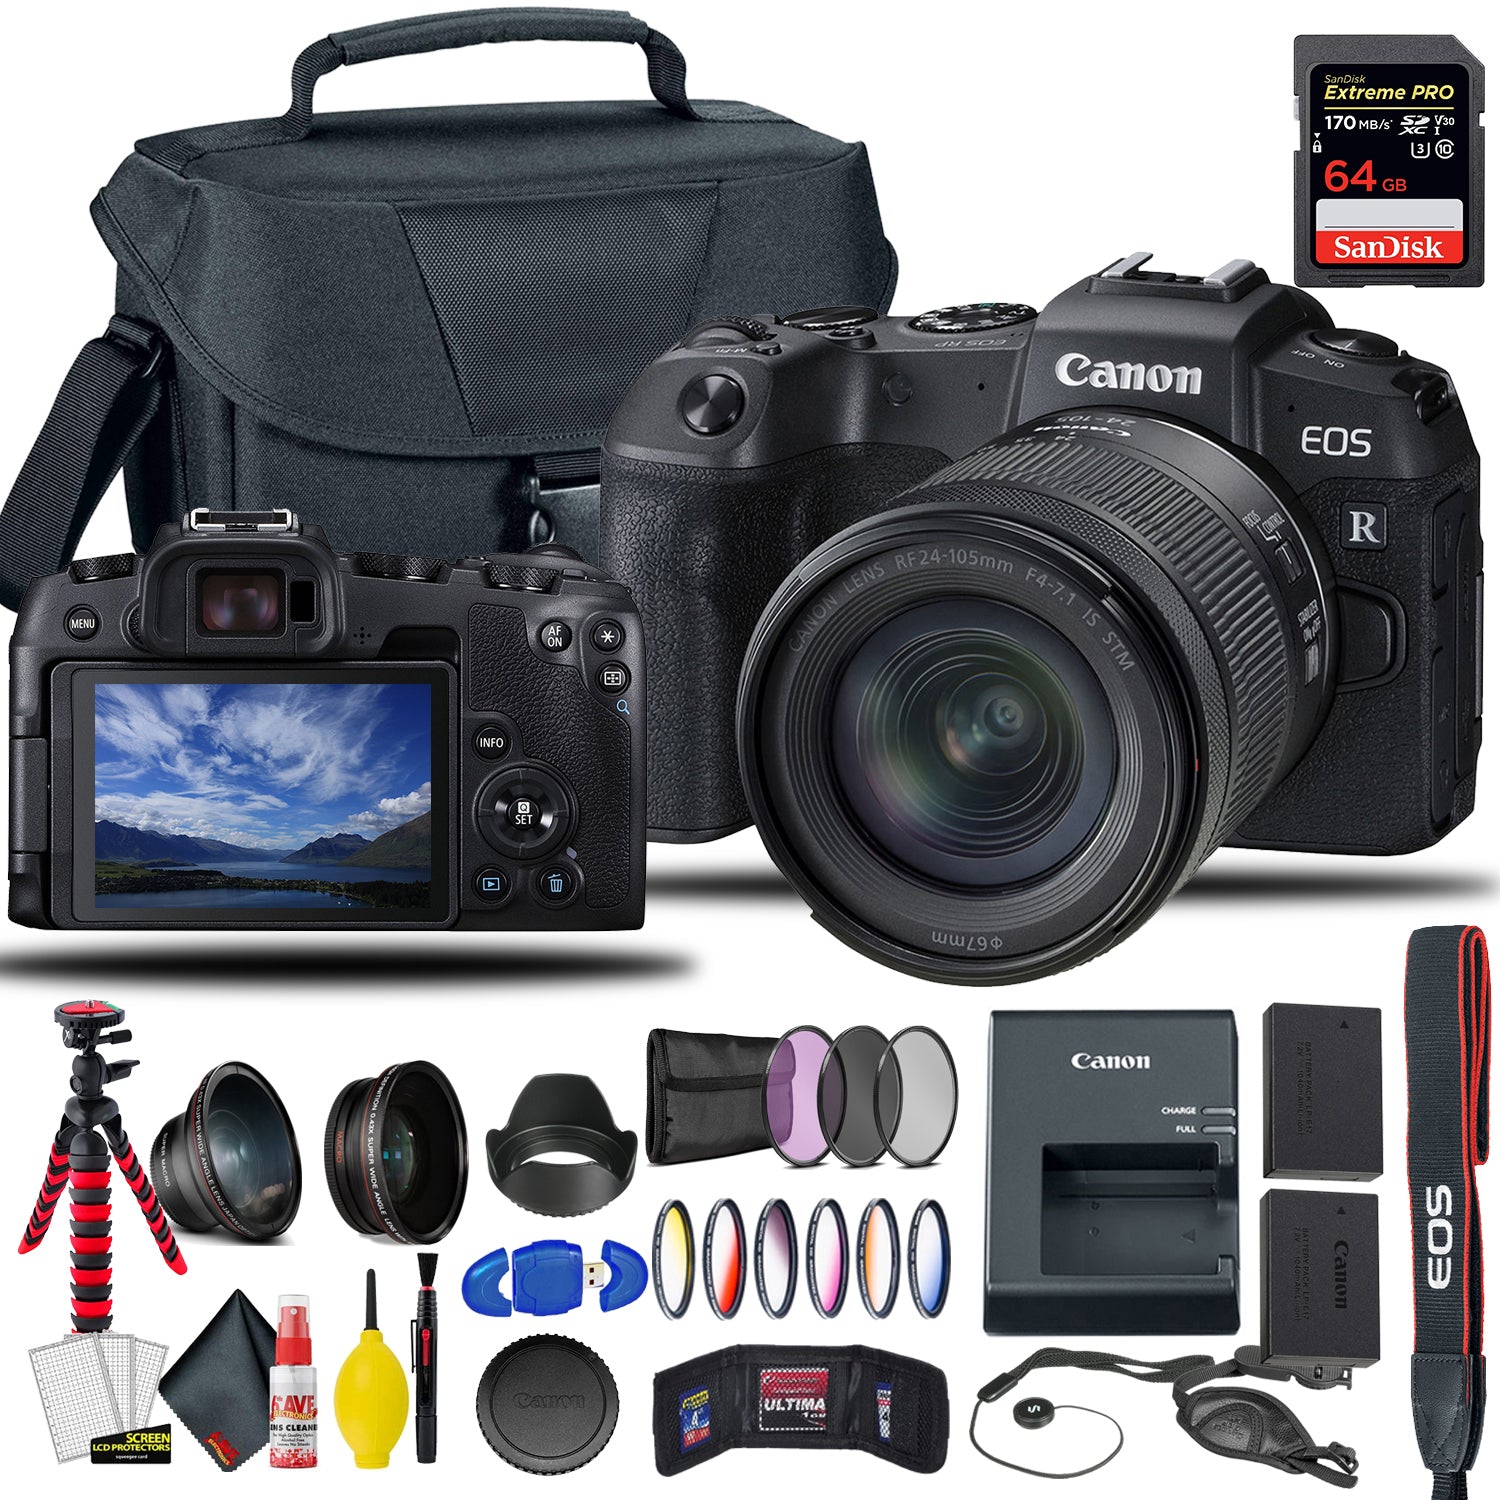 Canon EOS RP Mirrorless Digital Camera with 24-105mm f/4-7.1 Lens + Extra Canon Battery, Creative Filters + EOS Camera Bag + Sandisk Extreme Pro 64GB Card + 6AVE Cleaning Set, + More